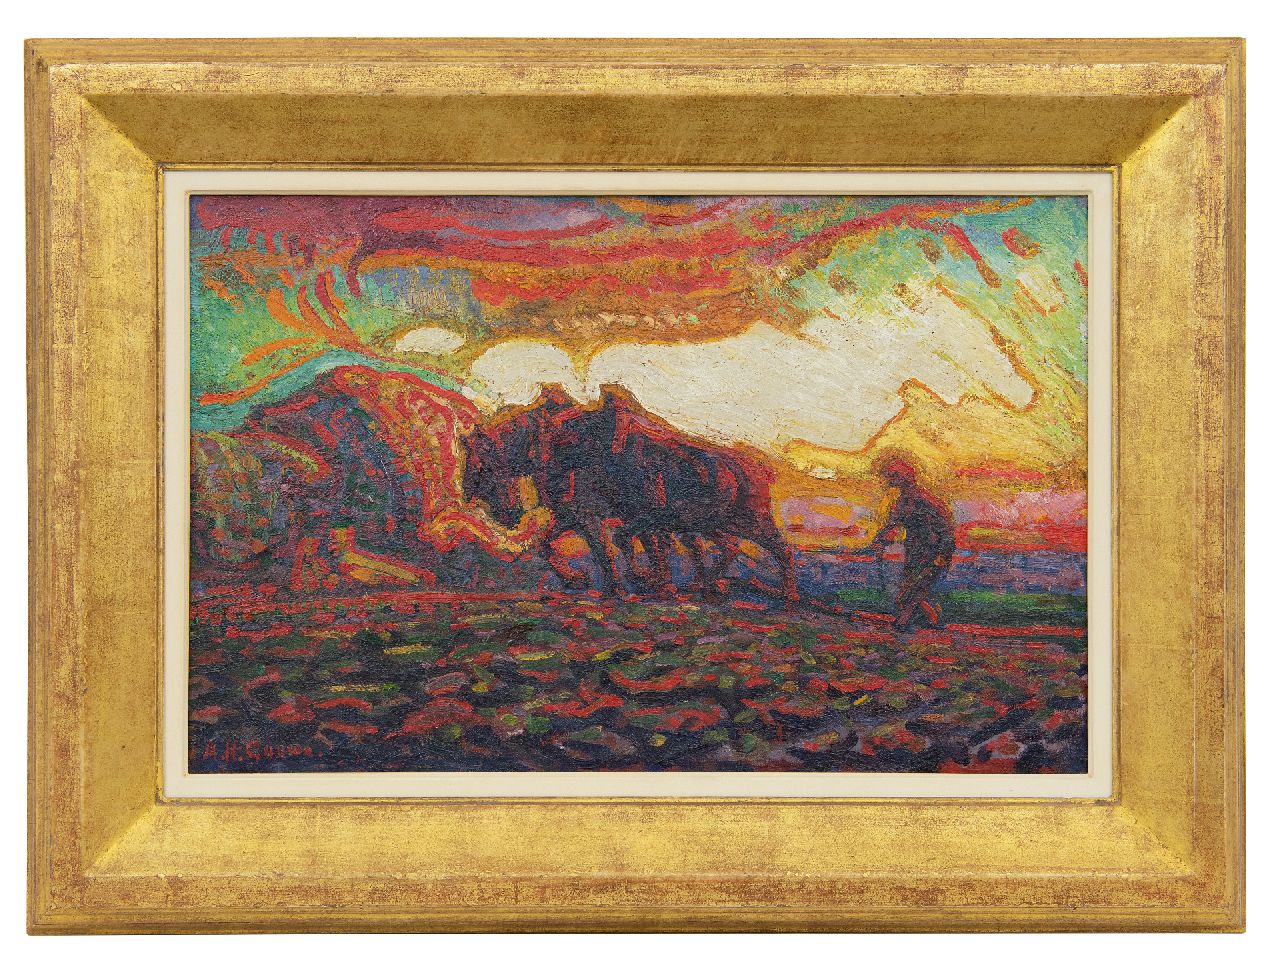 Gouwe A.H.  | Adriaan Herman Gouwe, Plowing farmer, oil on canvas 31.4 x 48.4 cm, signed l.l. and painted ca. 1910-1915